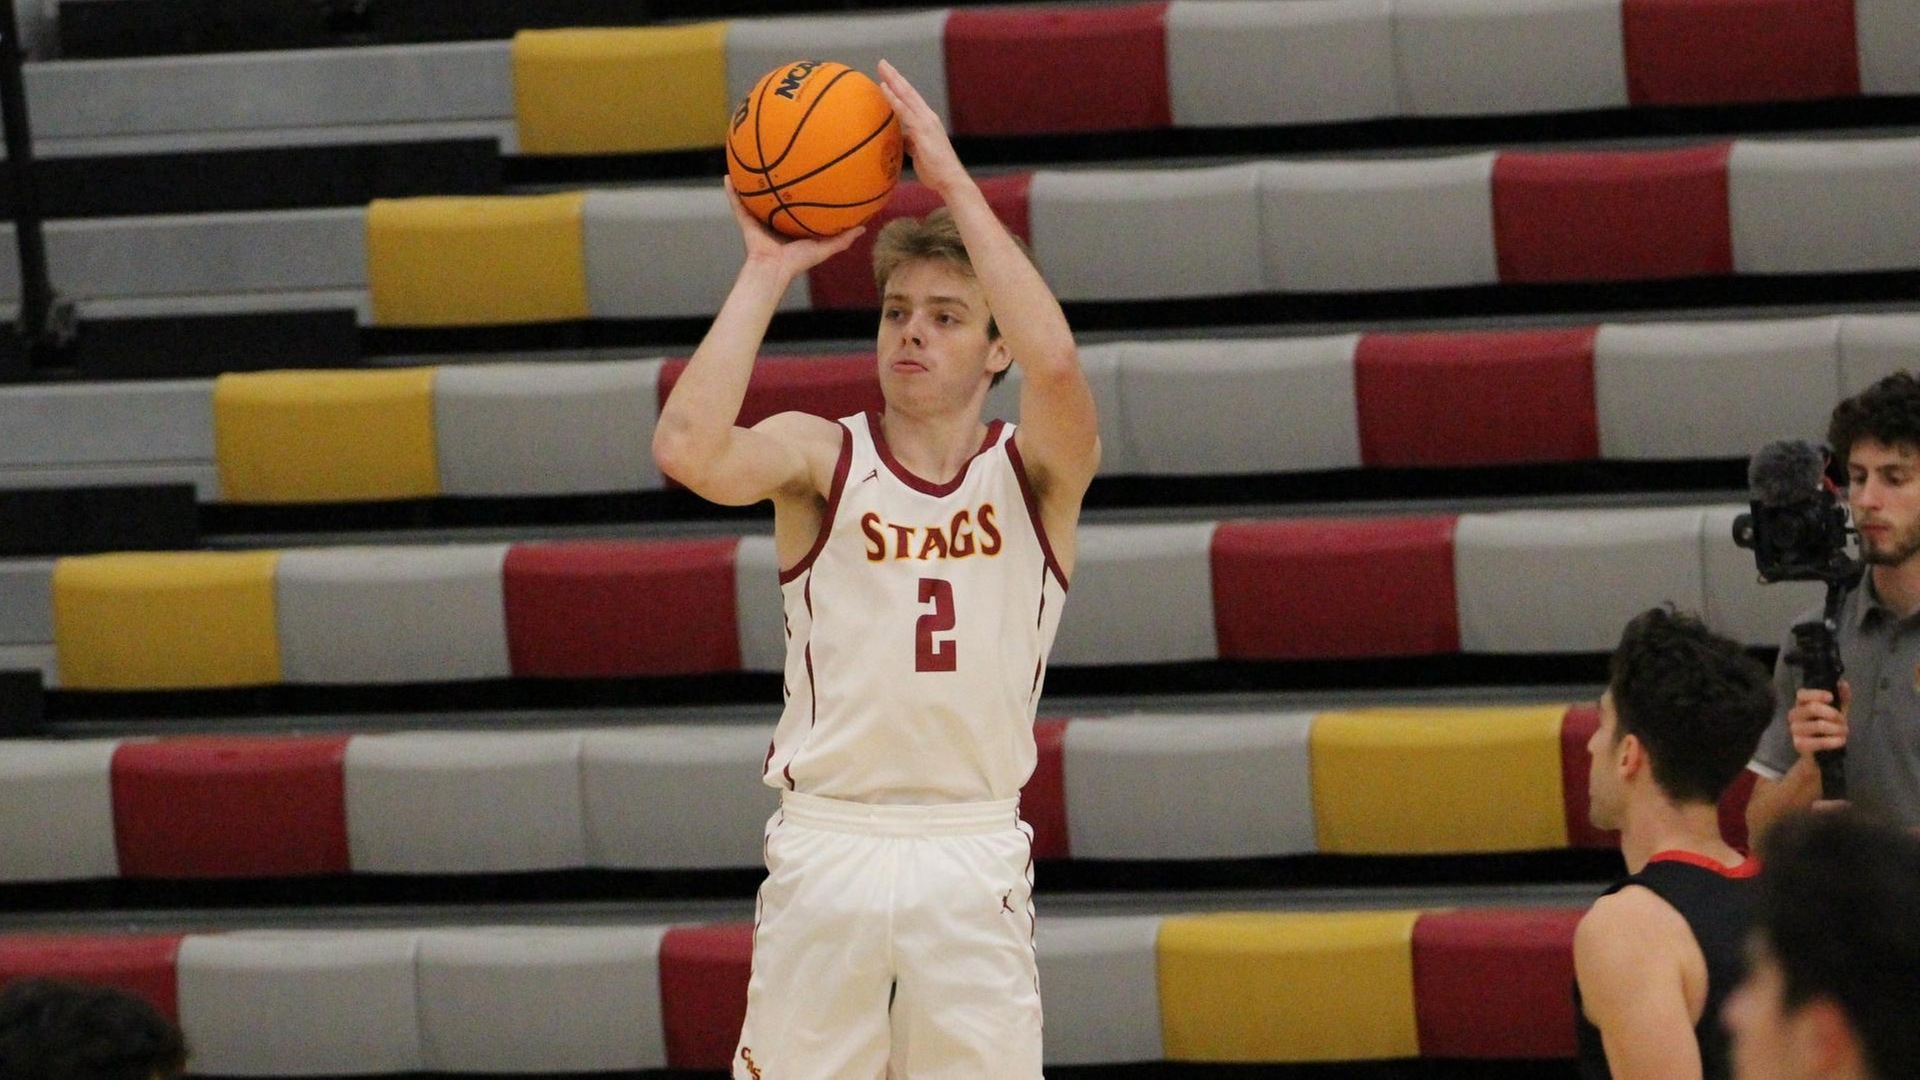 Josh Angle had 32 points for the Stags